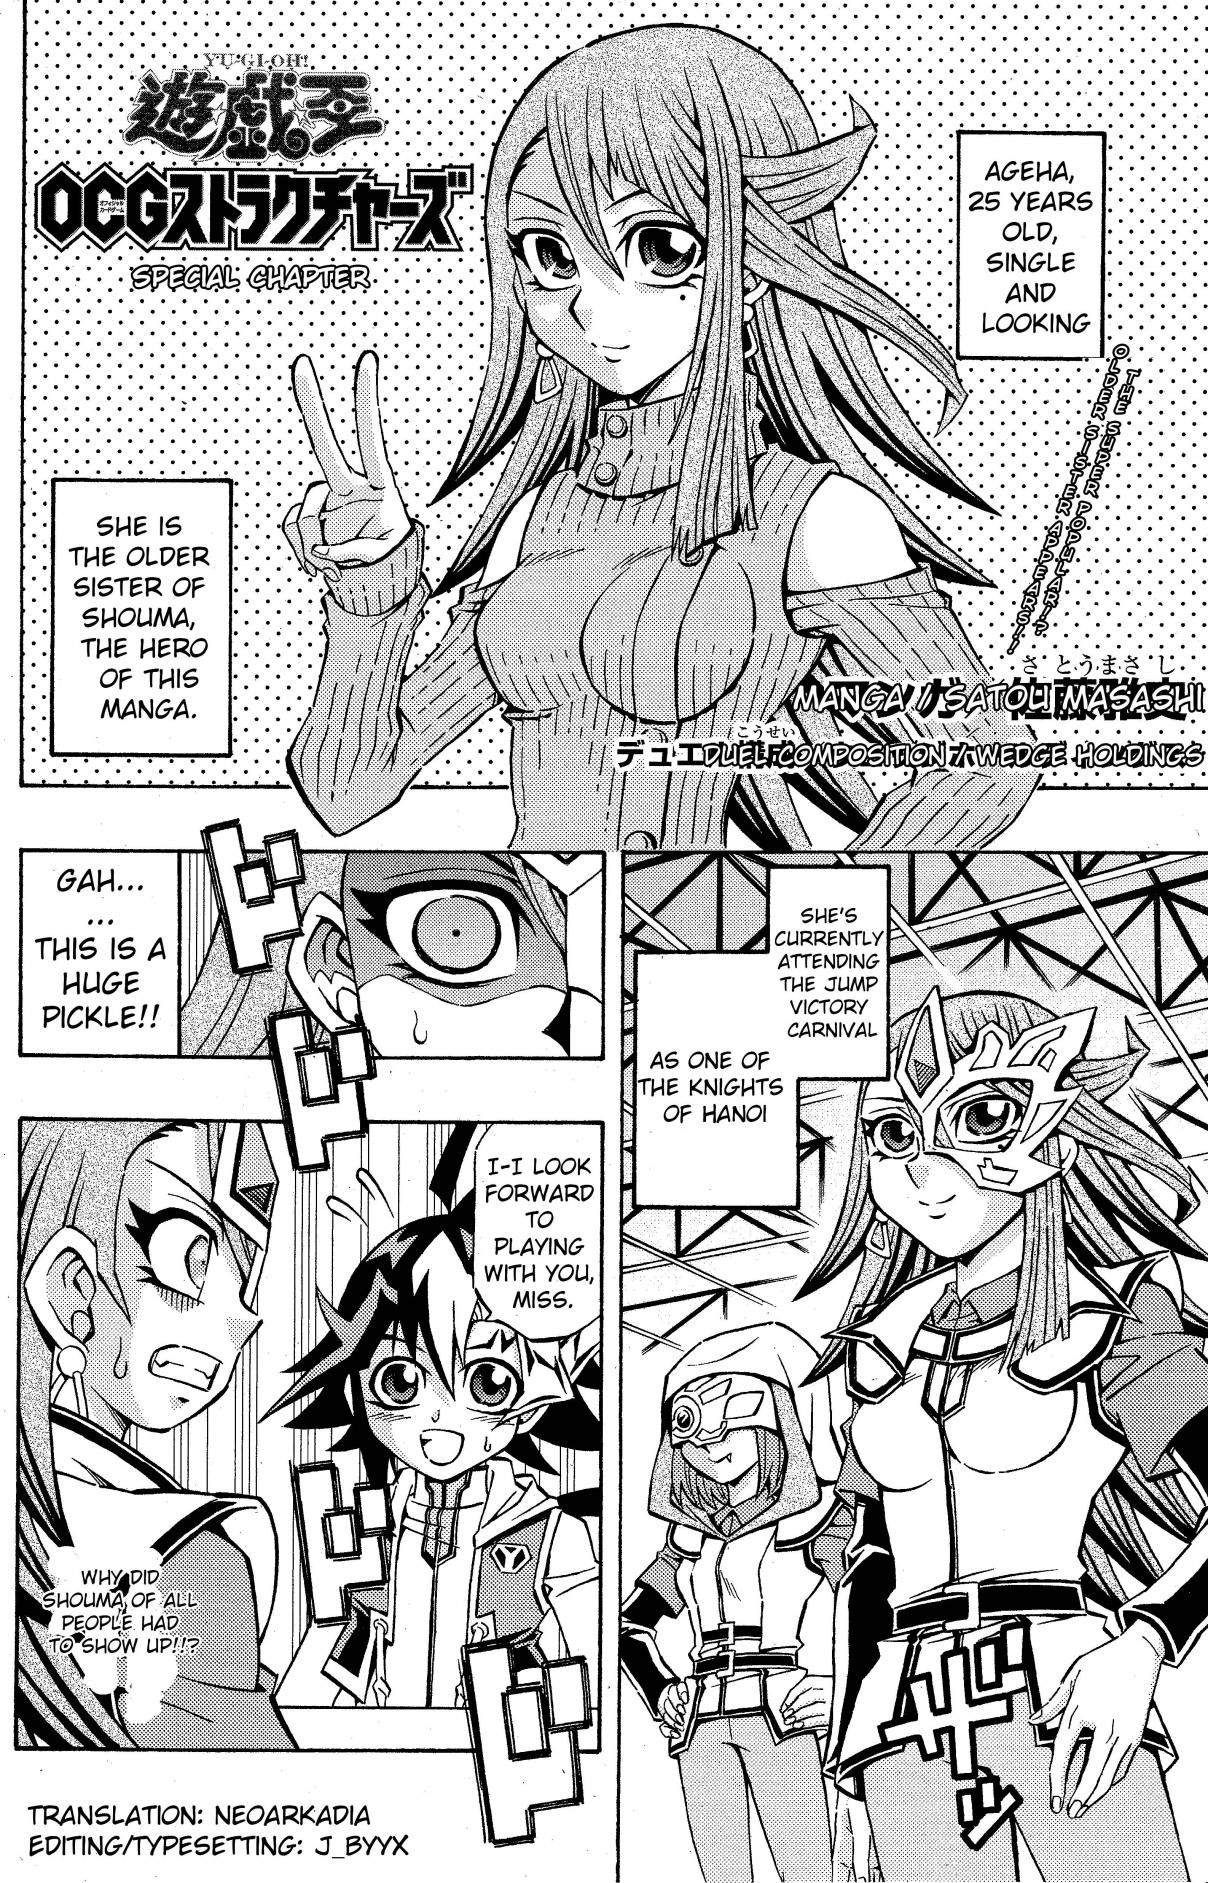 Yu Gi Oh! OCG Structures Ch. 3.5 Special Chapter